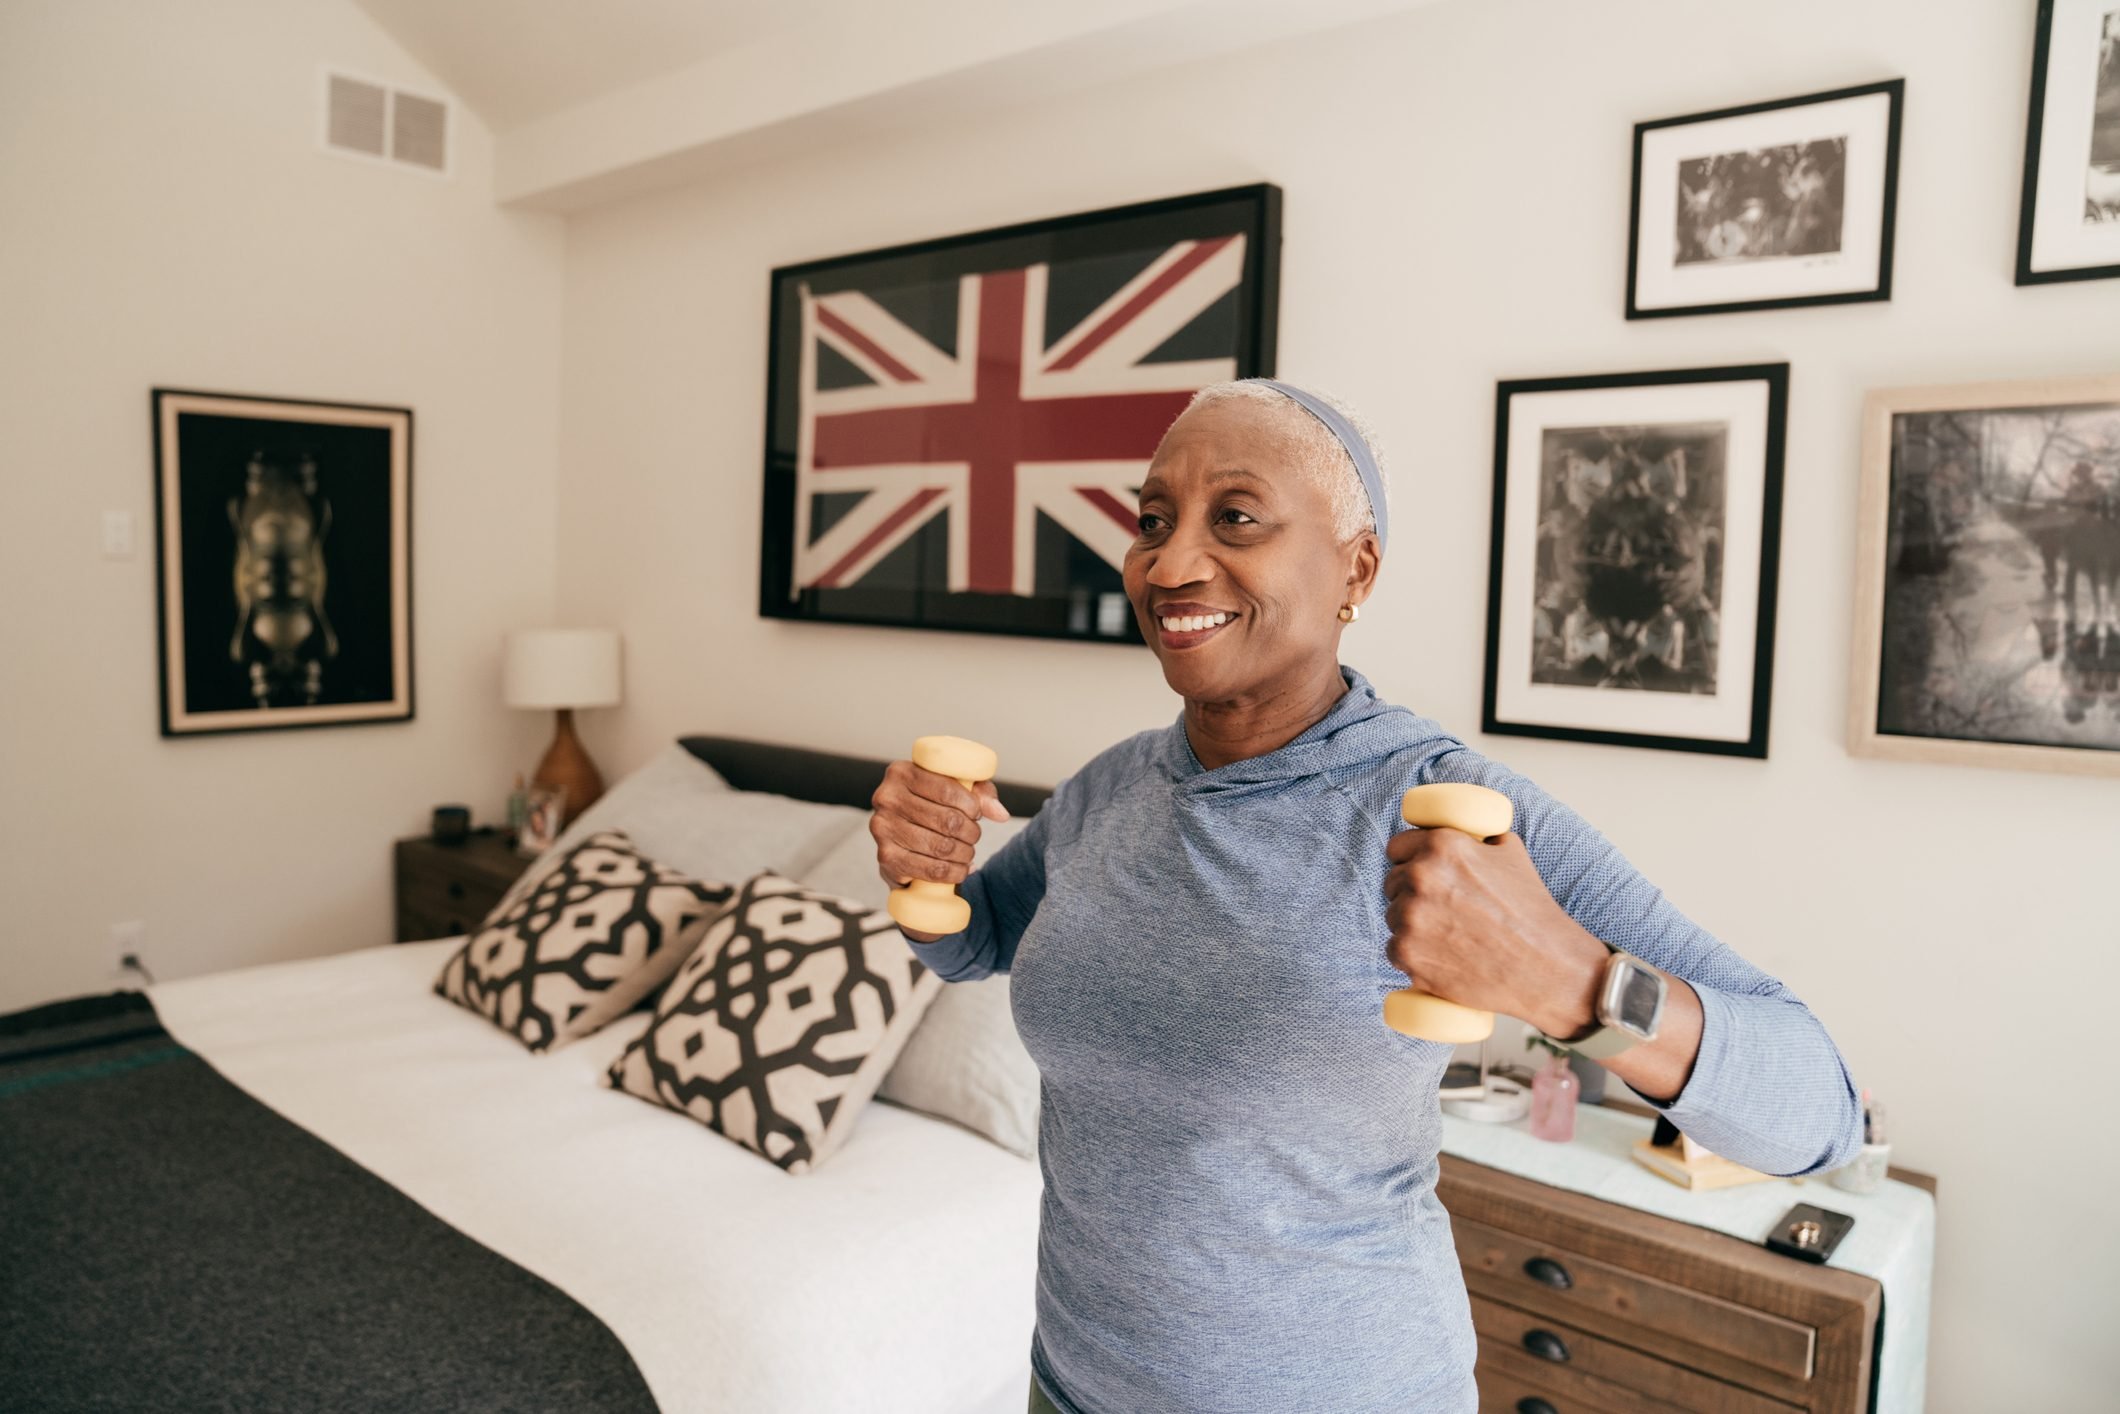 5 Easy Exercises Seniors Can Do at Home